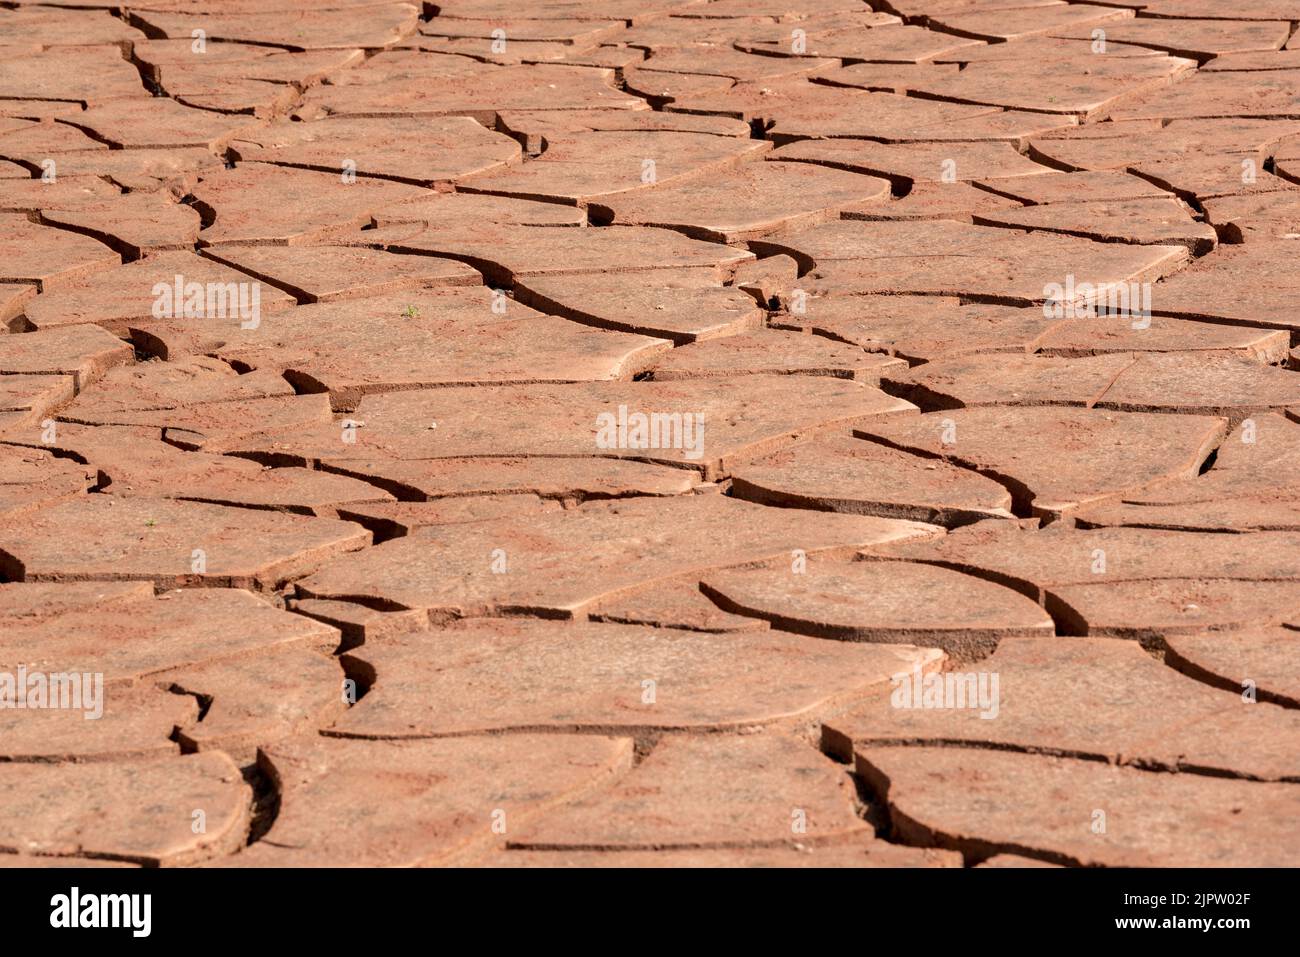 Cracks in drying silt along the Green River in Canyonlands National Park, Utah. Stock Photo